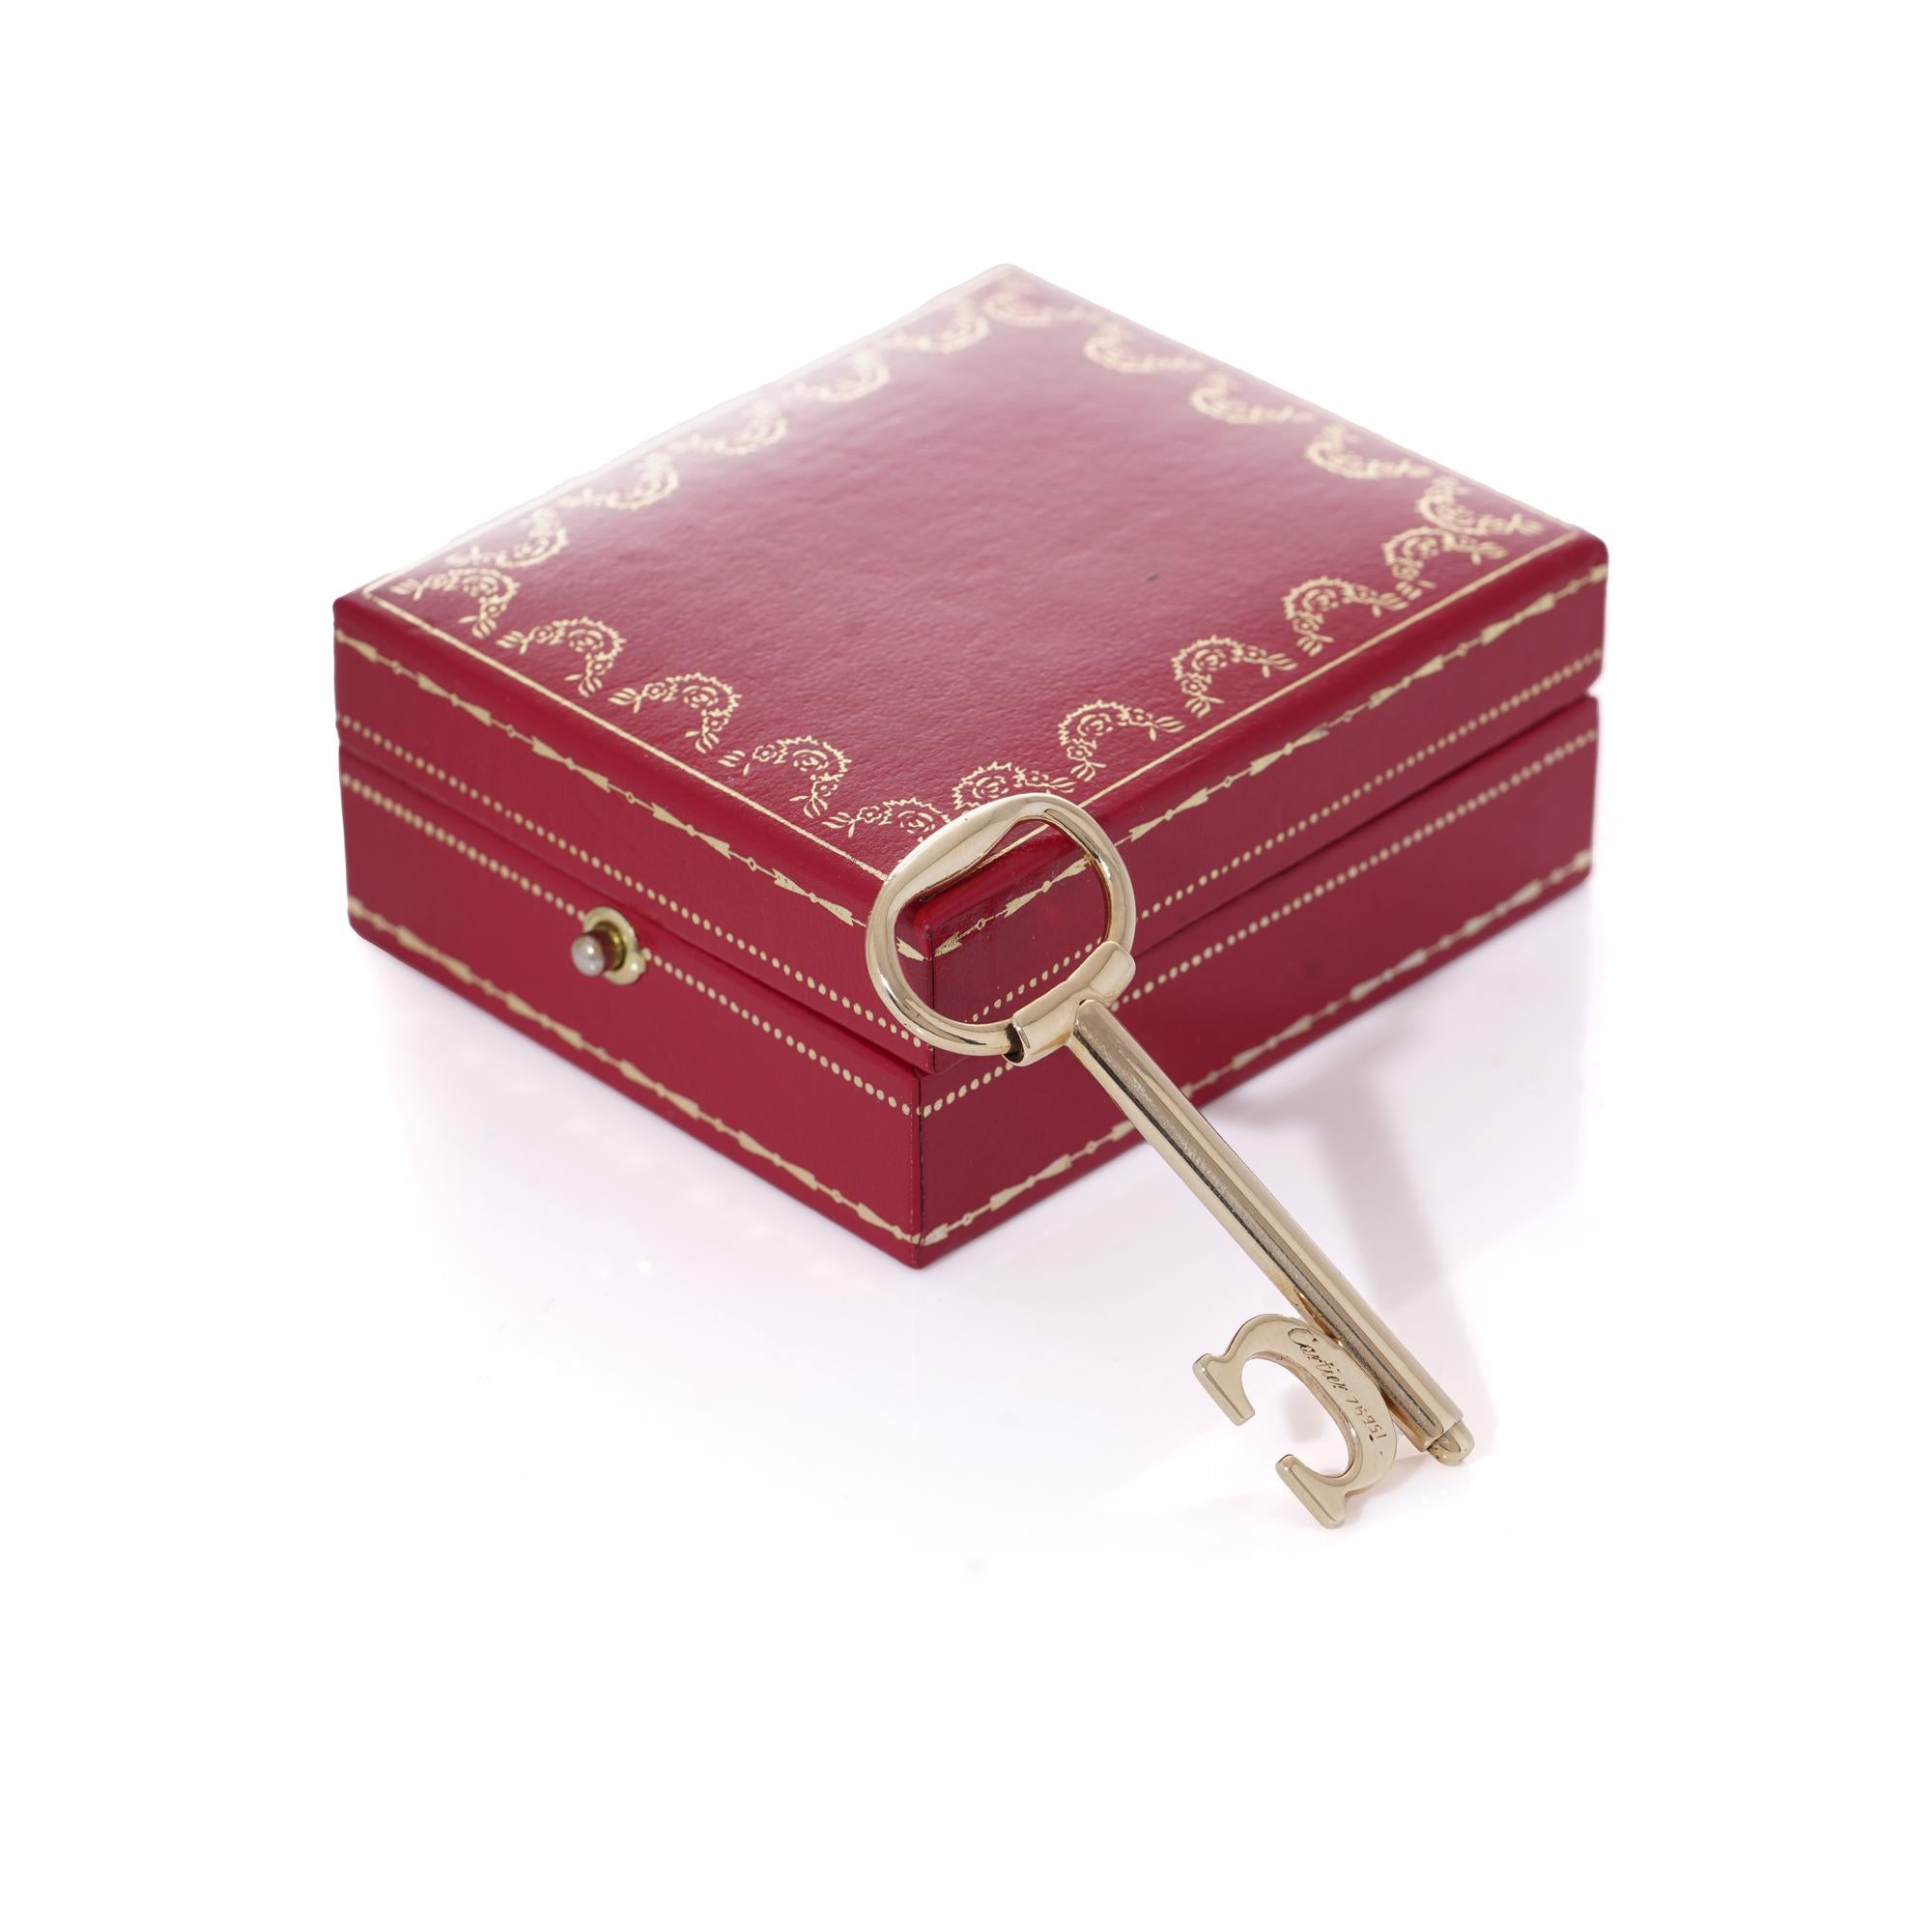 Cartier Vintage 18kt. yellow gold Key Charm pendant/keyring.
Made in England, London, 1978
Hallmarked for Cartier, Serial number, and full English hallmarks.

The Dimensions:
Height x width: 6.1 x 2.4 cm
Weight: 11.00 grams.


Comes in must de